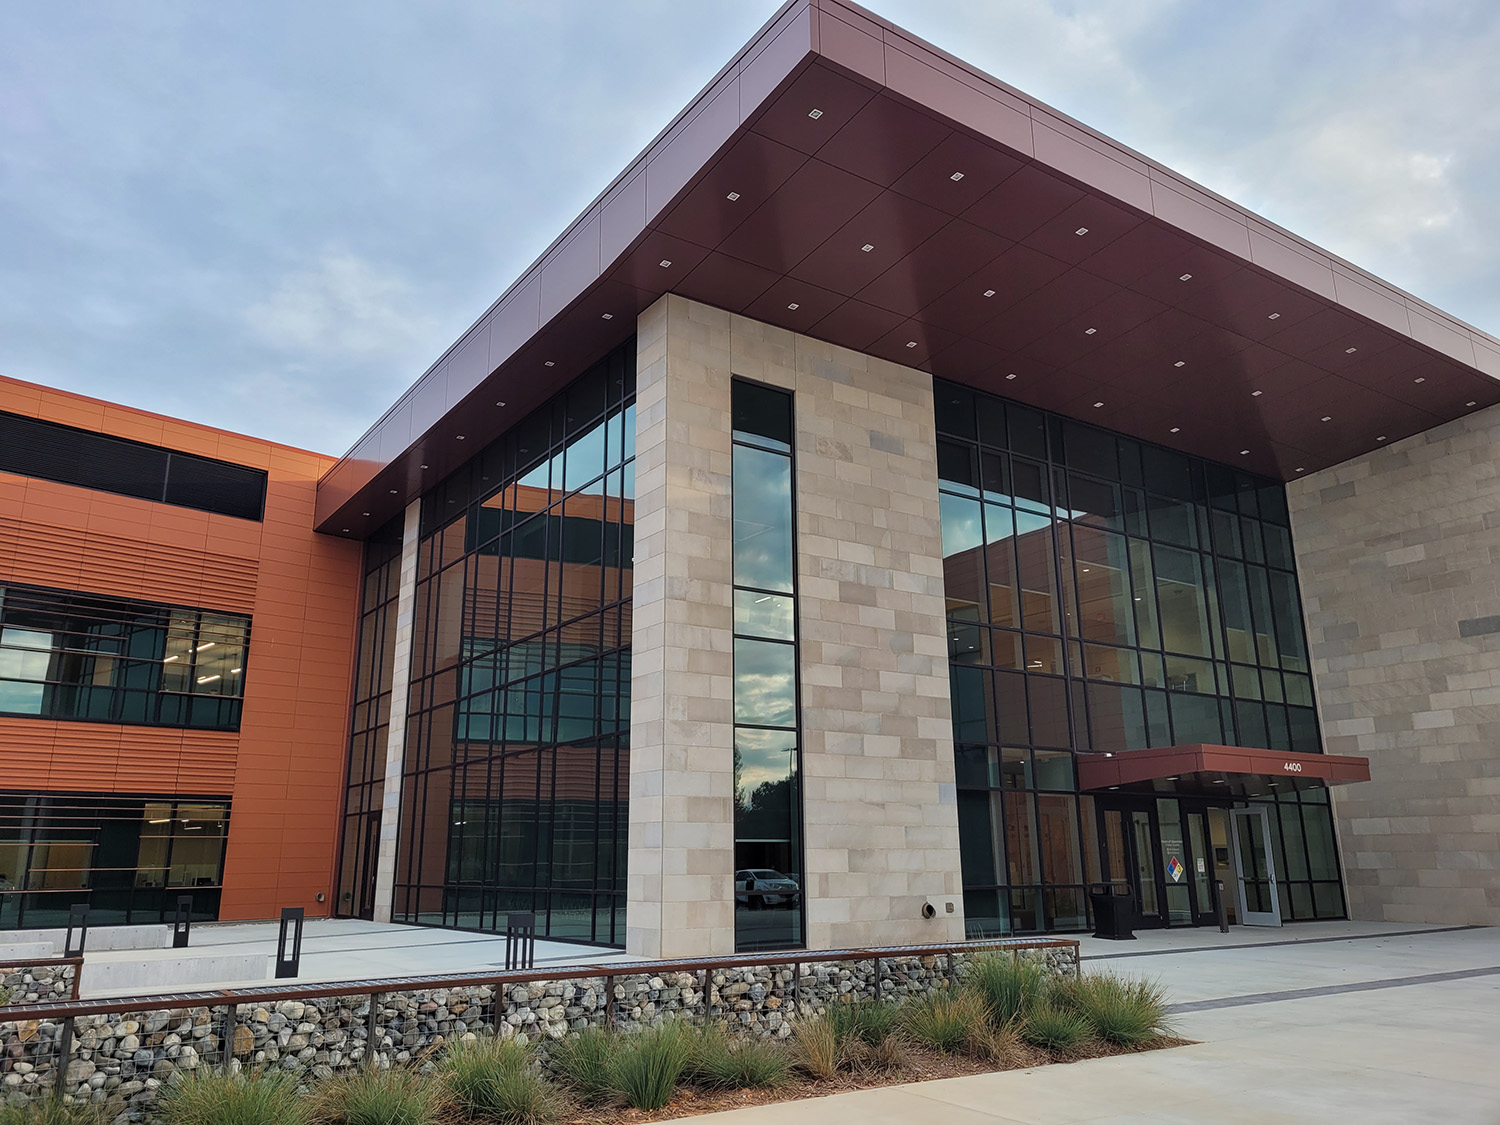 The new office building, NC Agricultural in Raleigh, North Carolina, features a sophisticated glass and metal façade, fabricated by Press Glass.